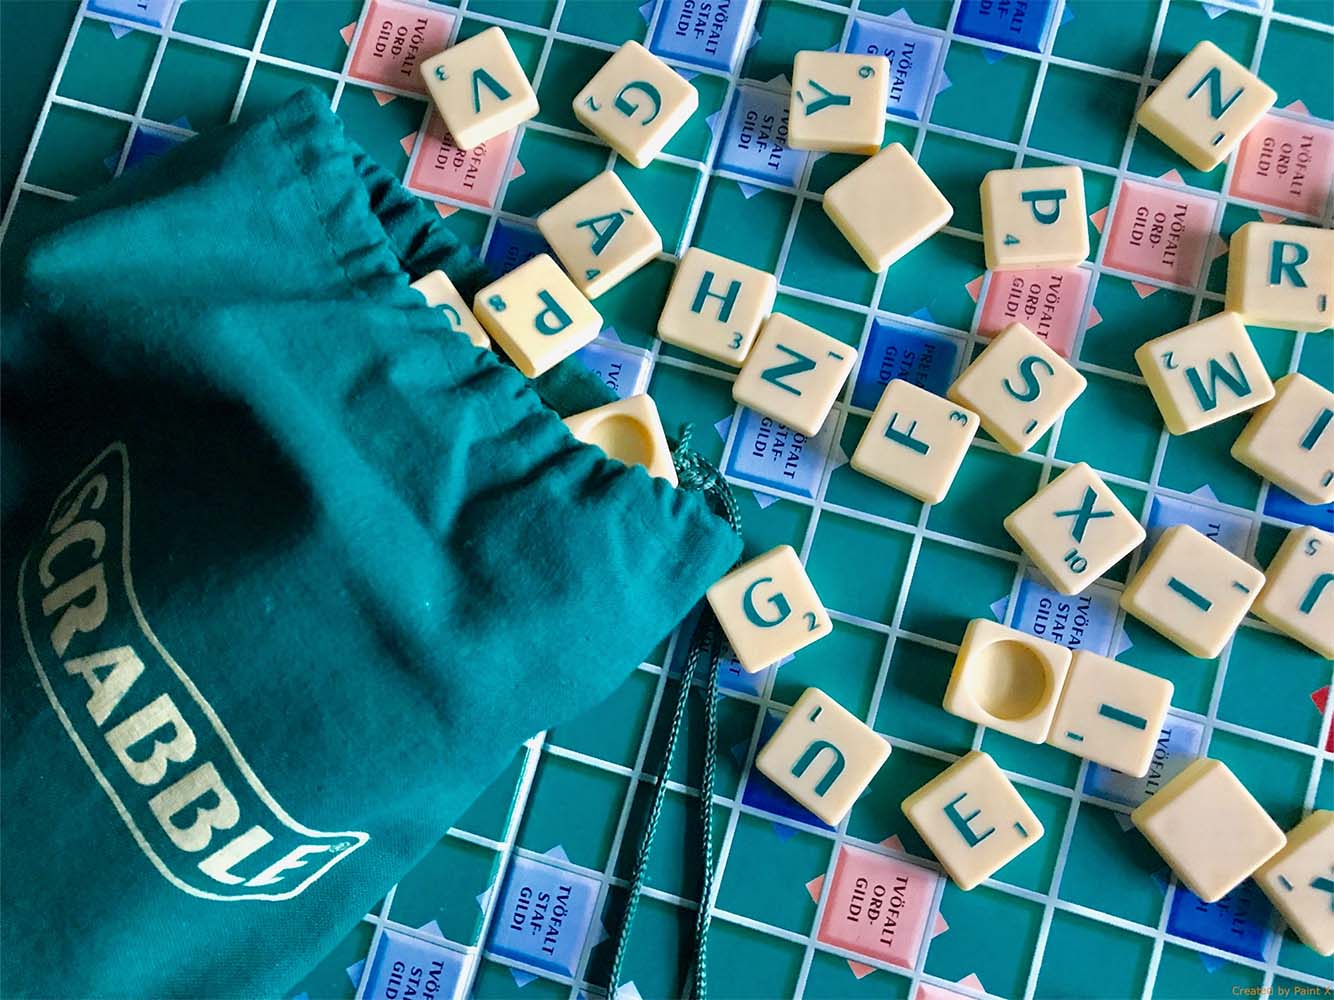 A game of Scrabble